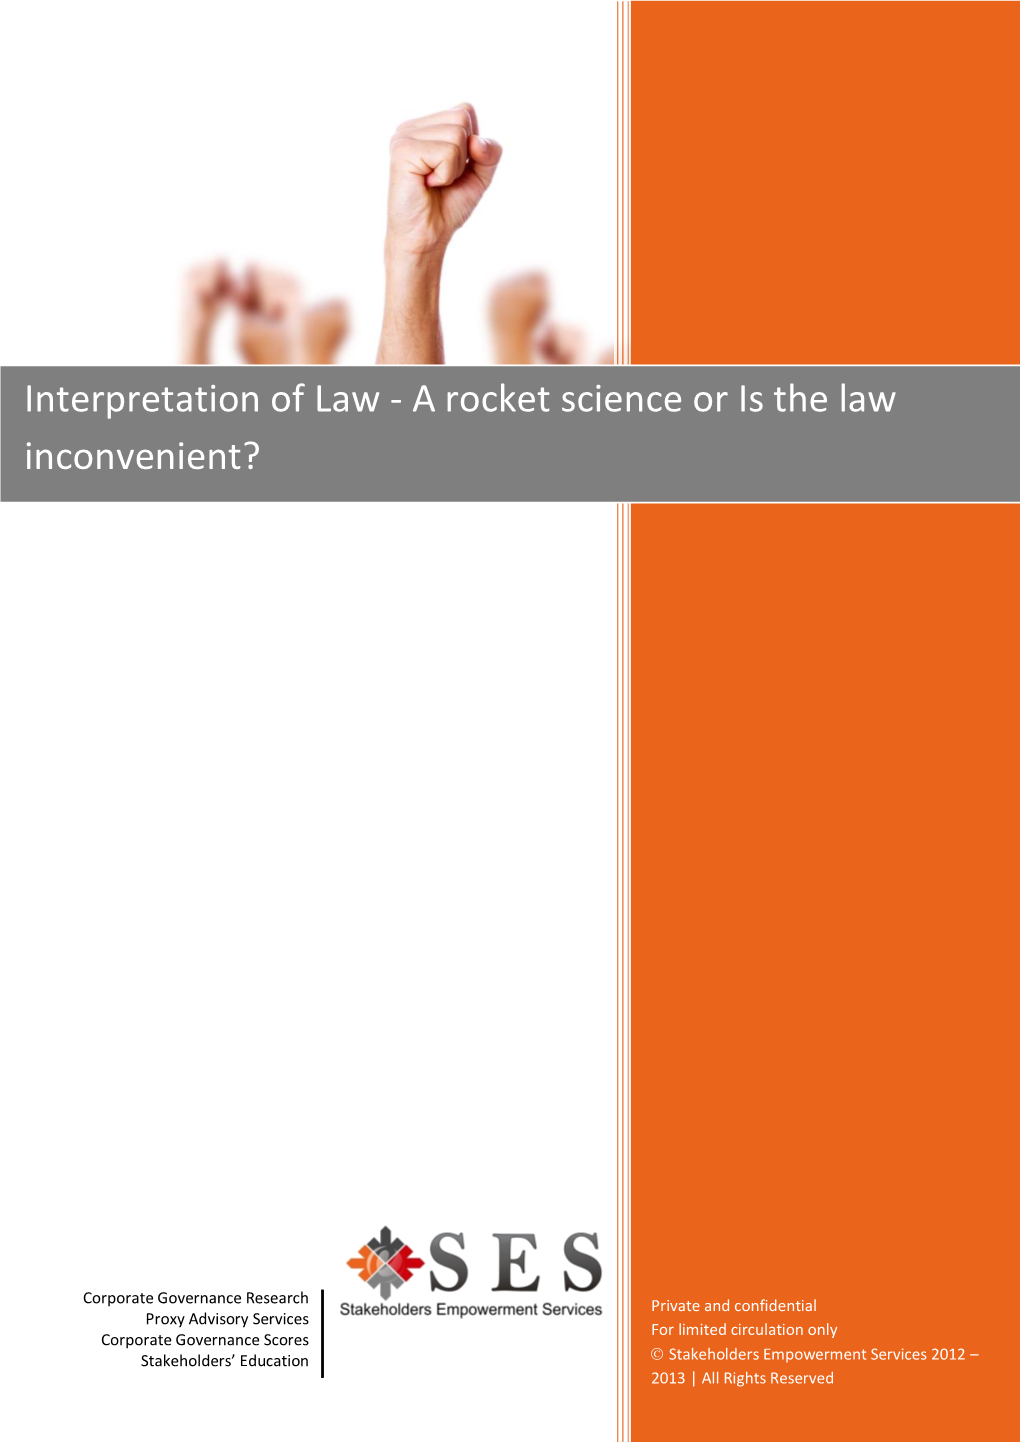 A Rocket Science Or Is the Law Inconvenient?